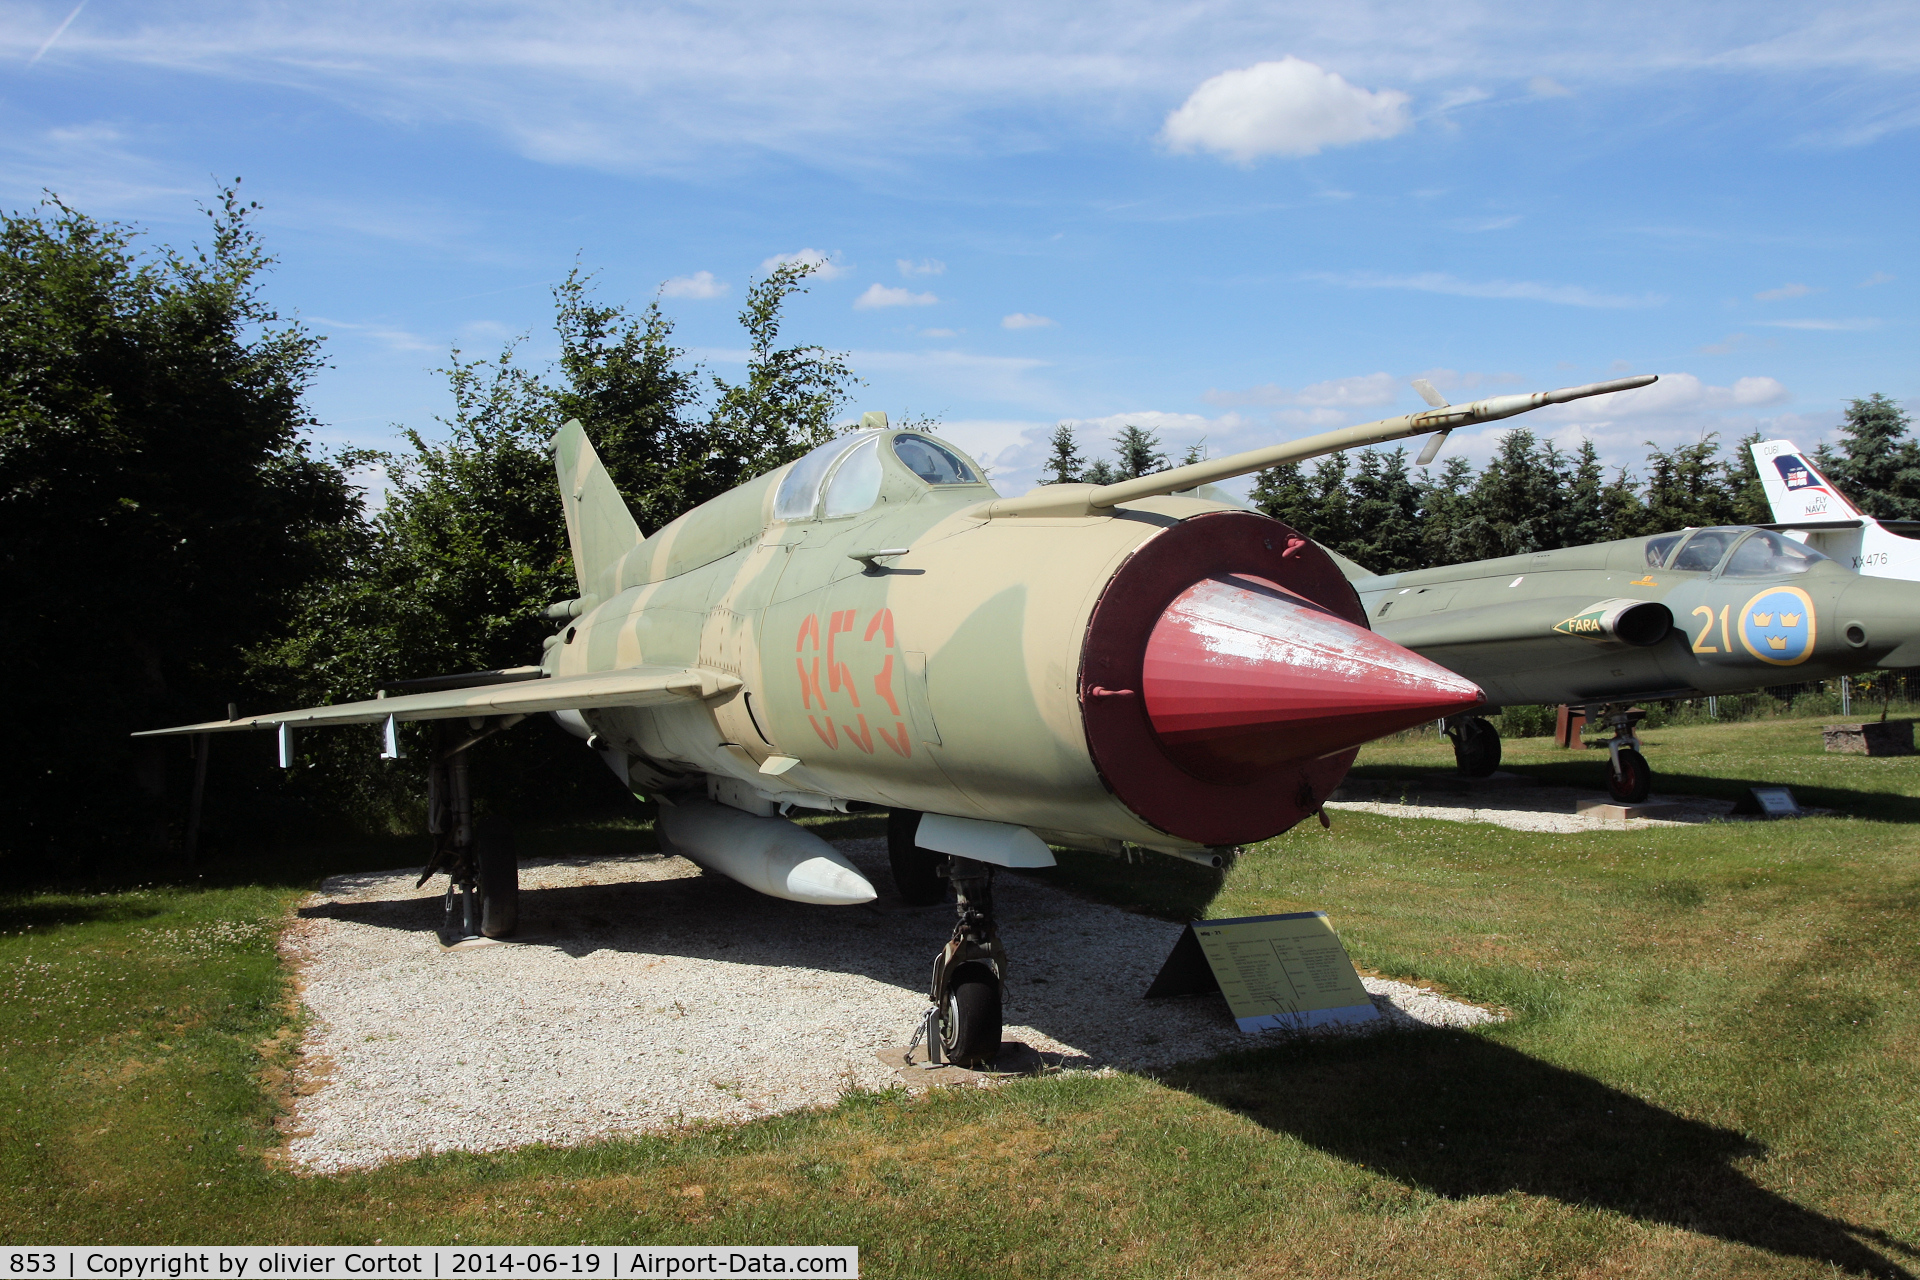 853, Mikoyan-Gurevich MiG-21Bis C/N 75058015, suffering from the bad weather of Germany